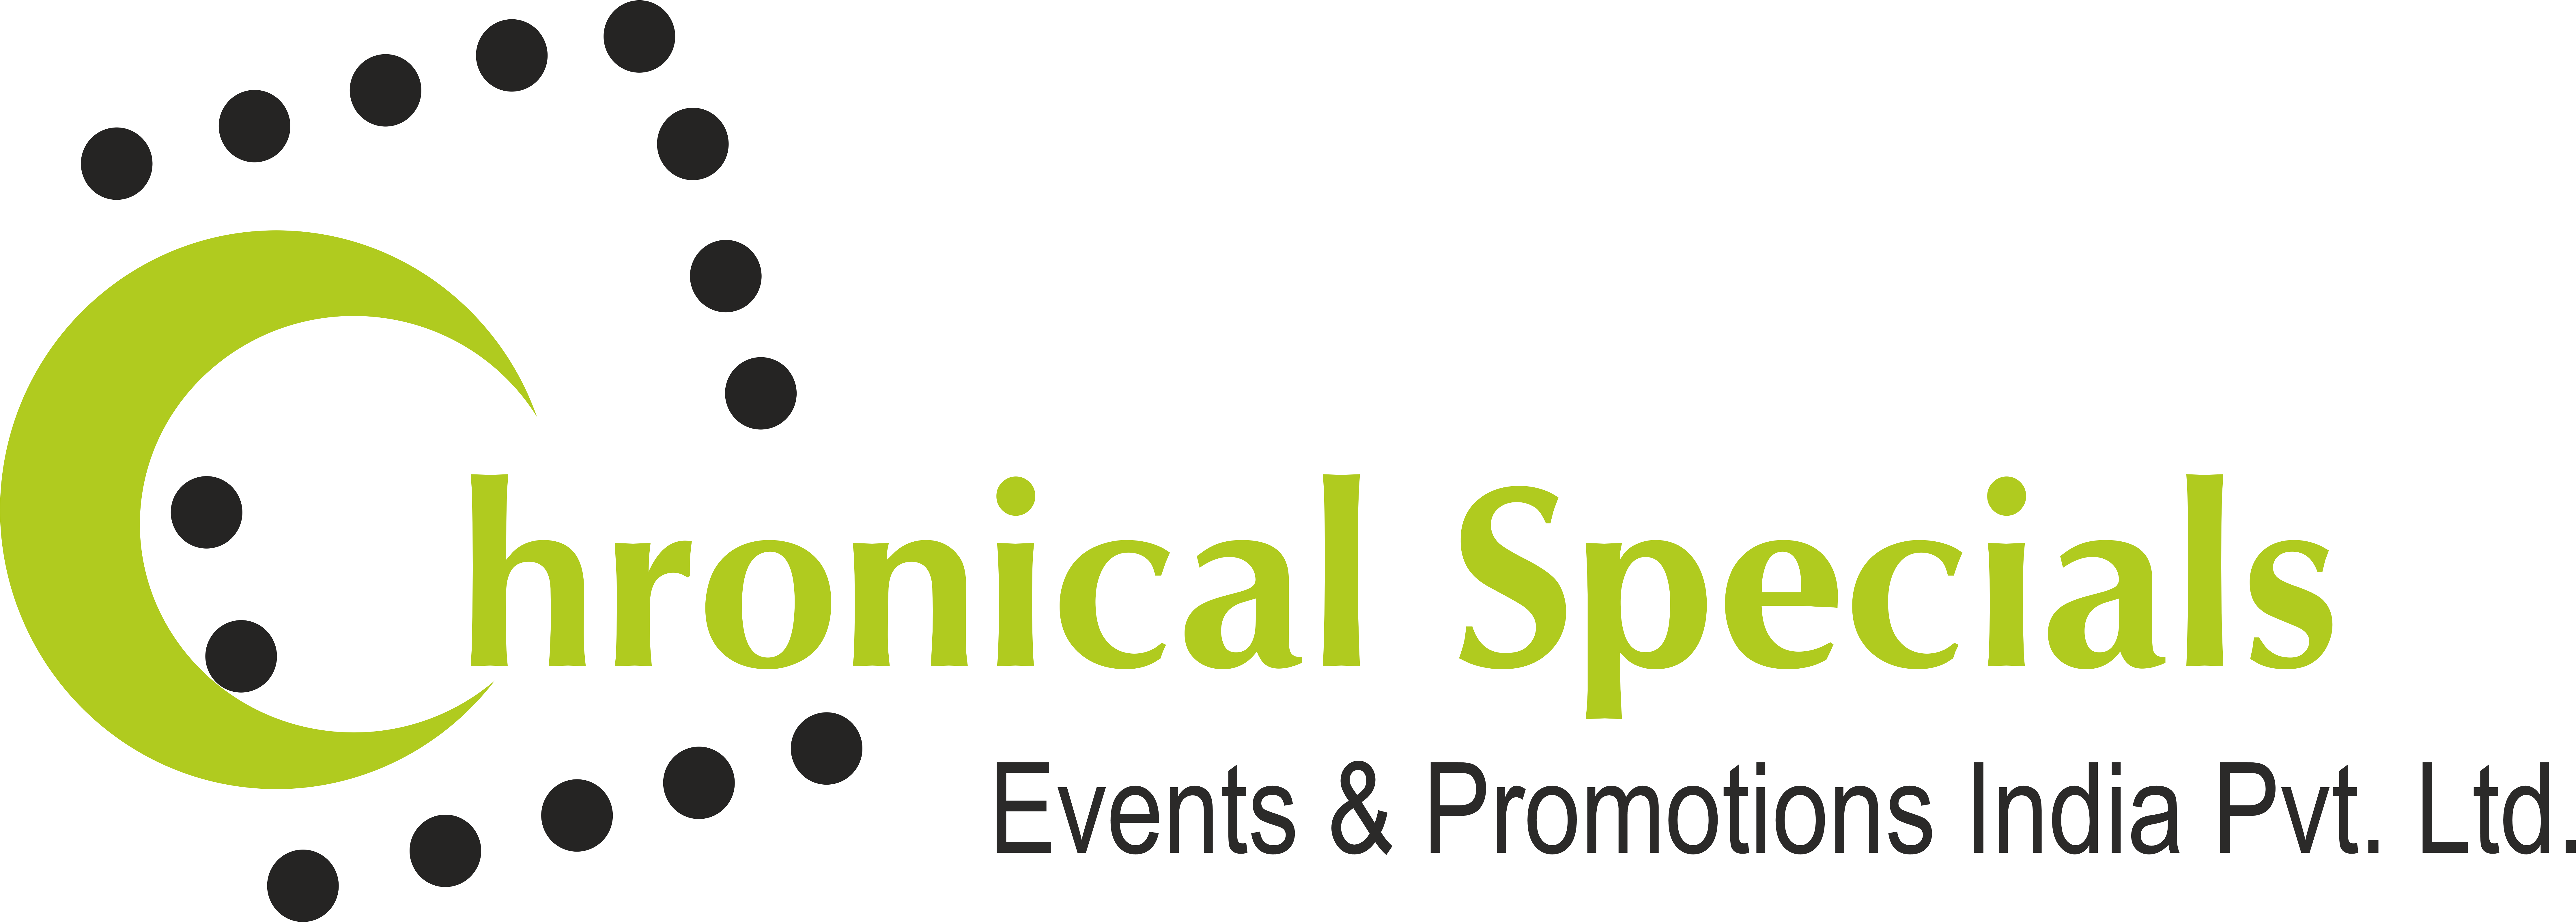 Chronicle Specials Events and Promotions Pvt. Ltd.